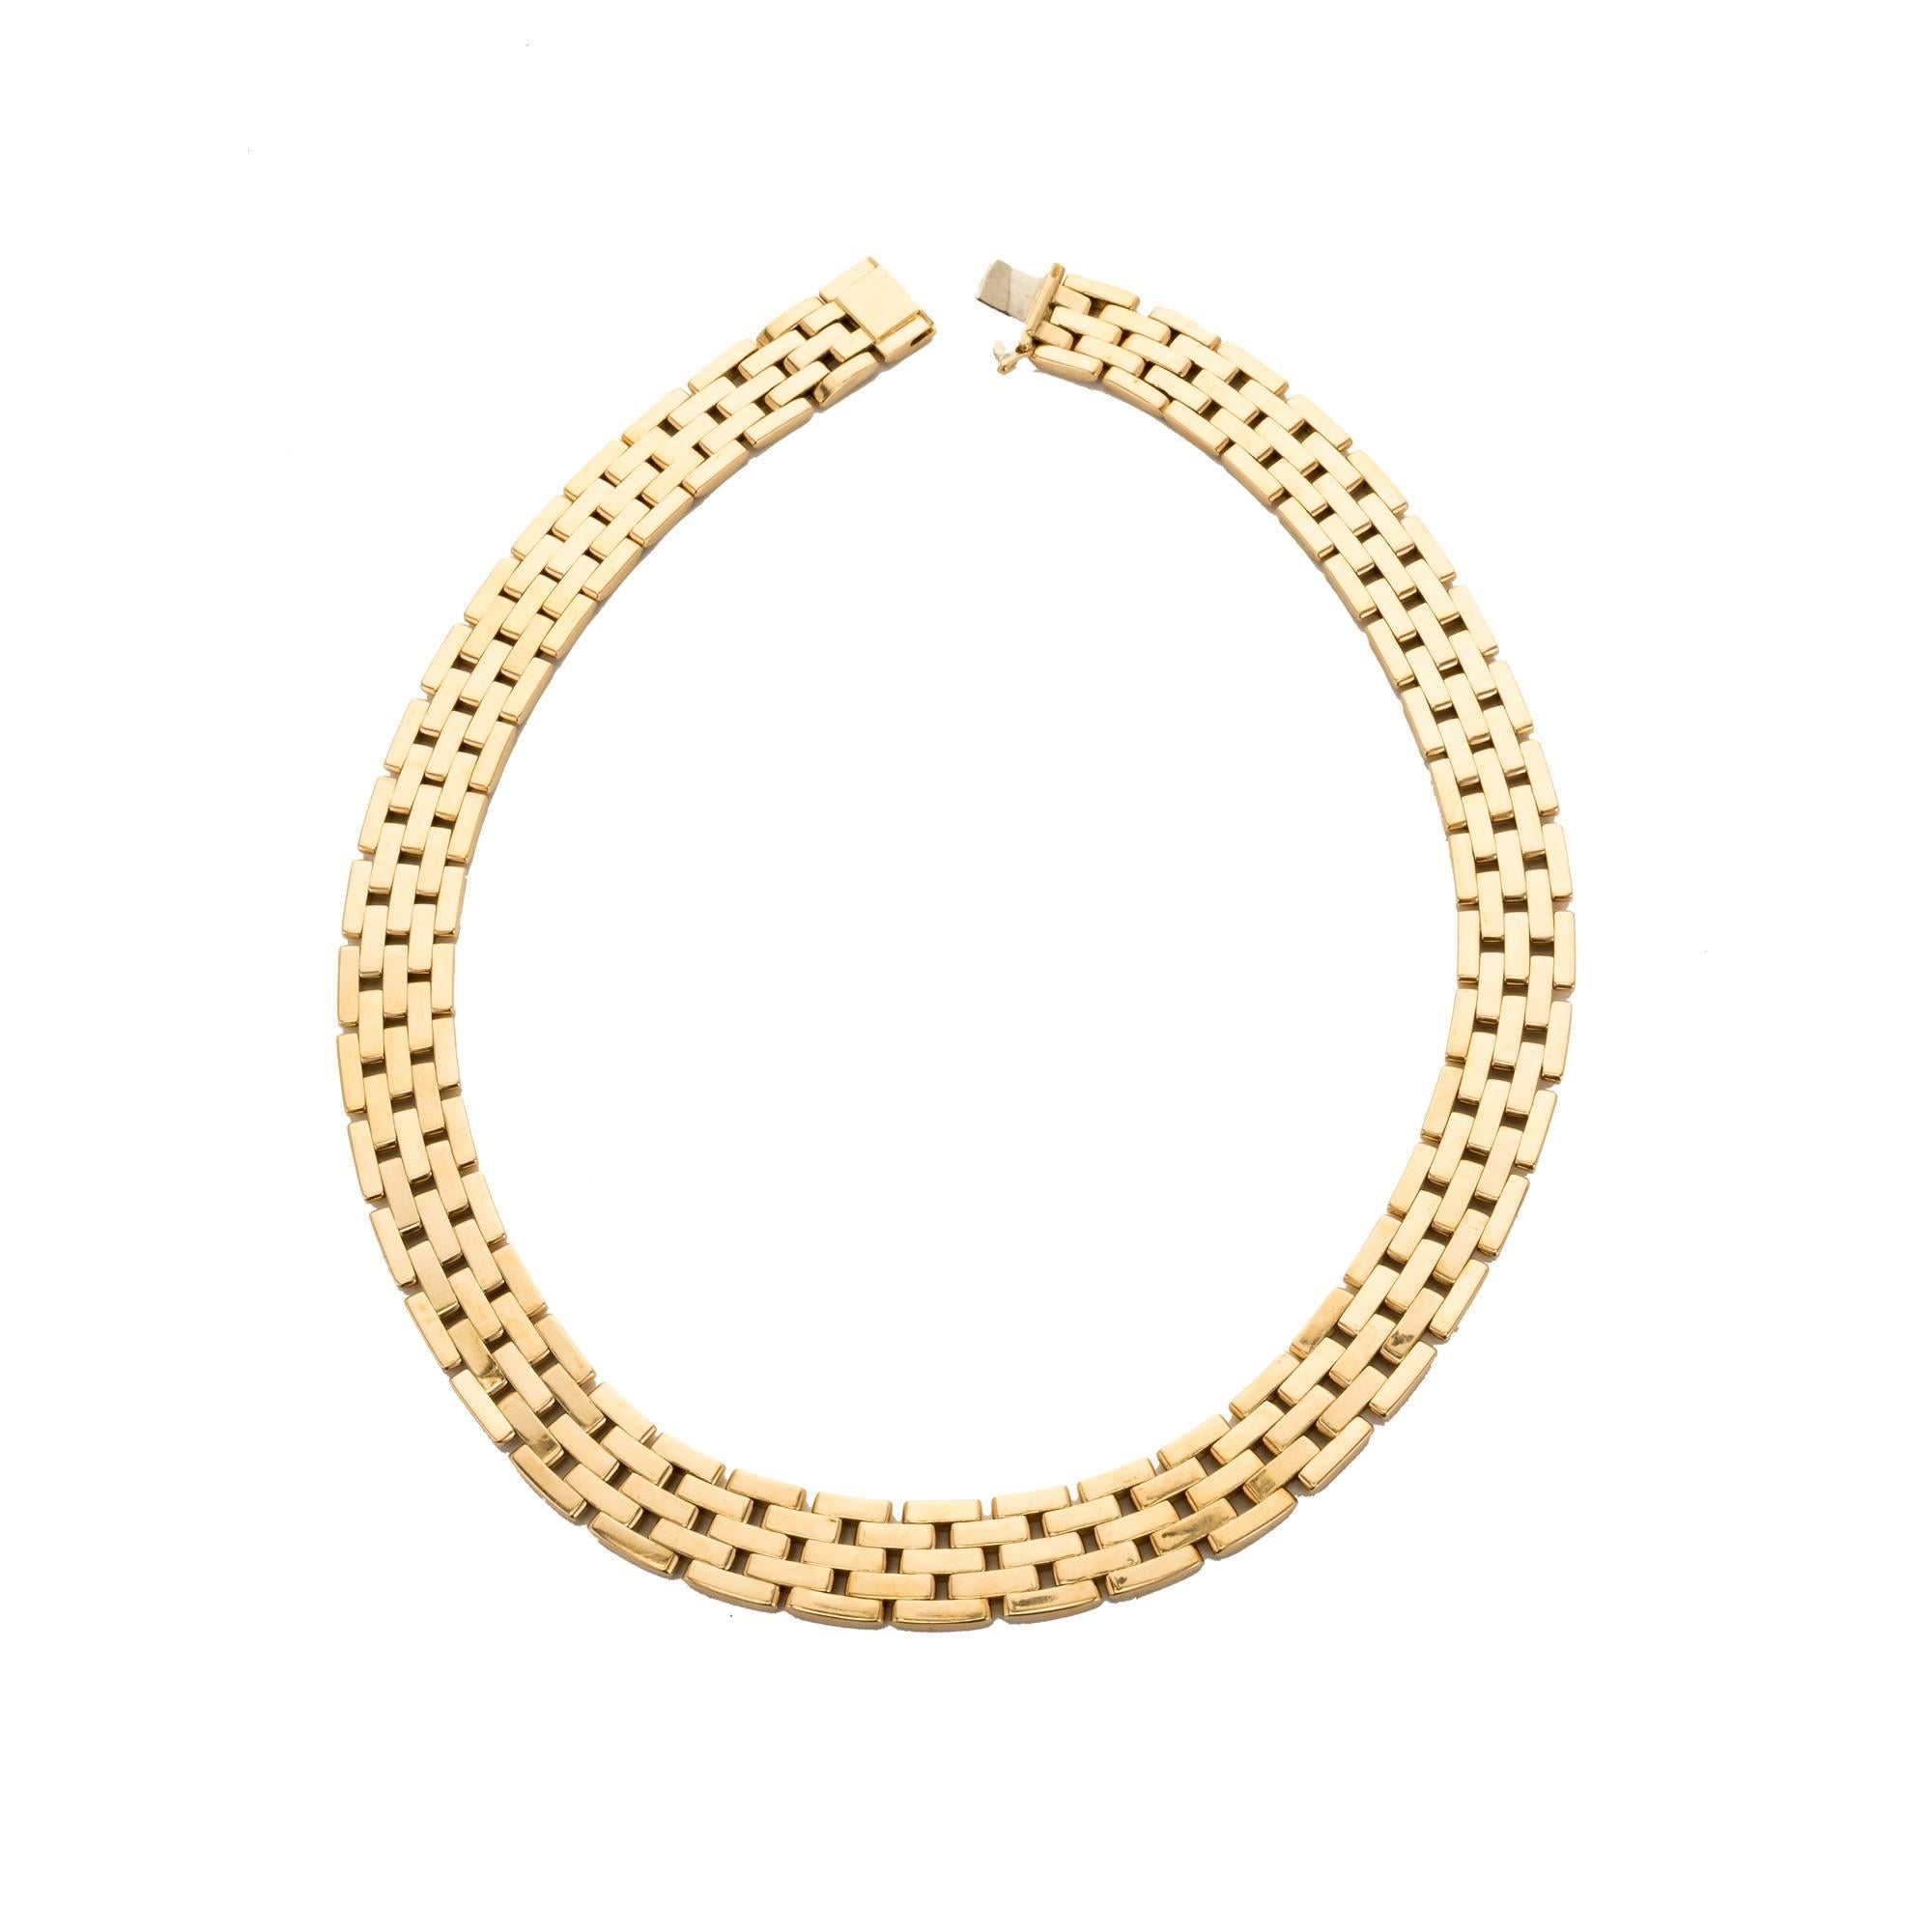 Cartier Maillon Panthere five row solid 18k gold necklace. 

18k Yellow gold
Tested: 18k
Stamped: 750
Hallmark: Cartier 632867
14.5 grams
Width: 14mm
Thickness: 2.7mm
Length: 18 inches
